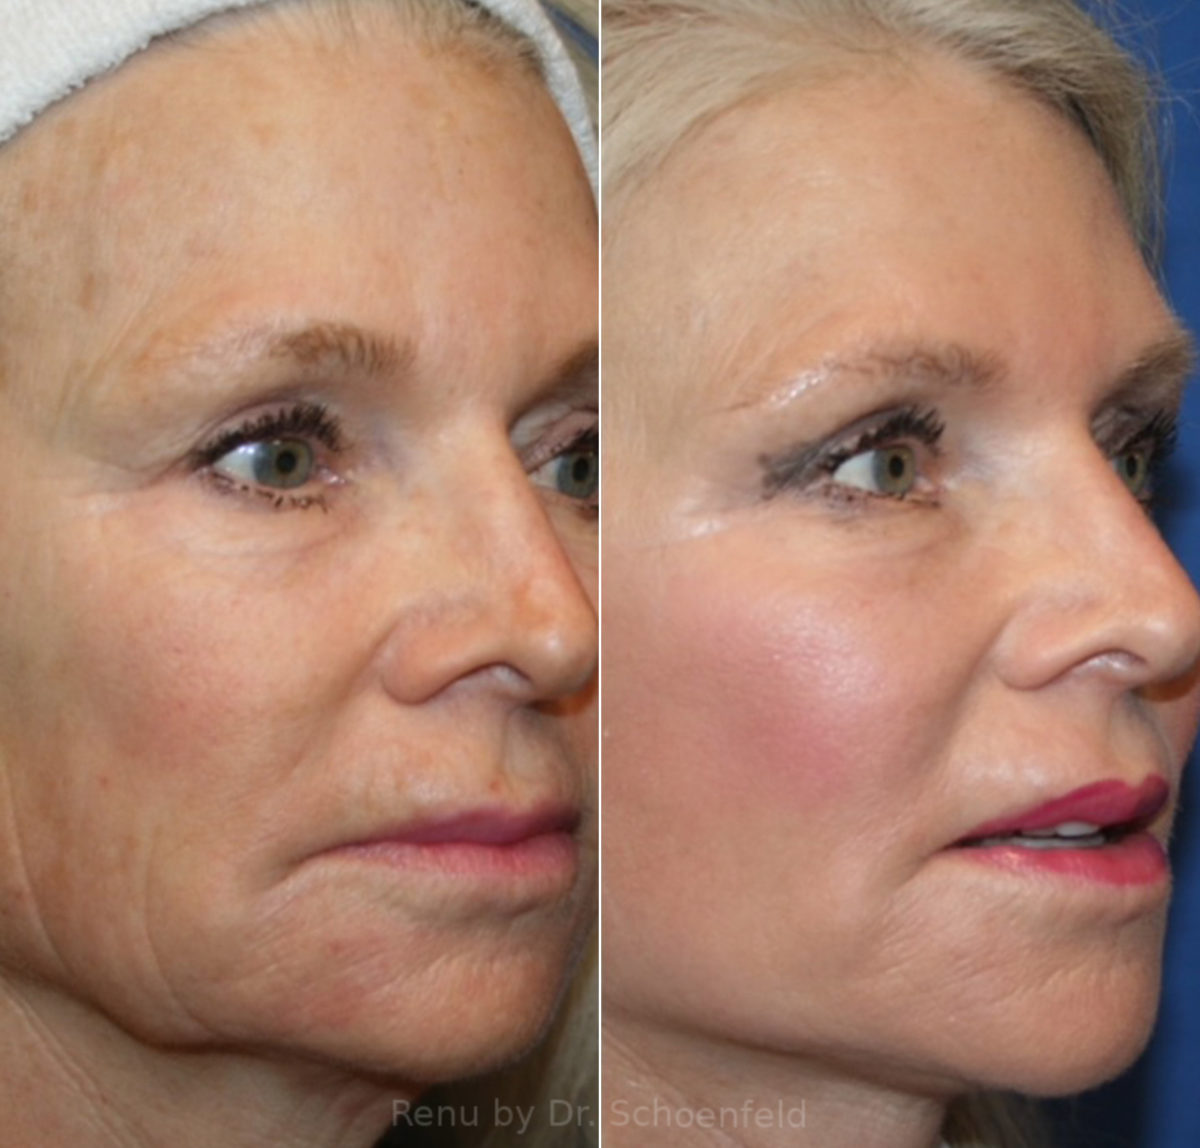 Facelift Before and After Photos in DC, Patient 14149